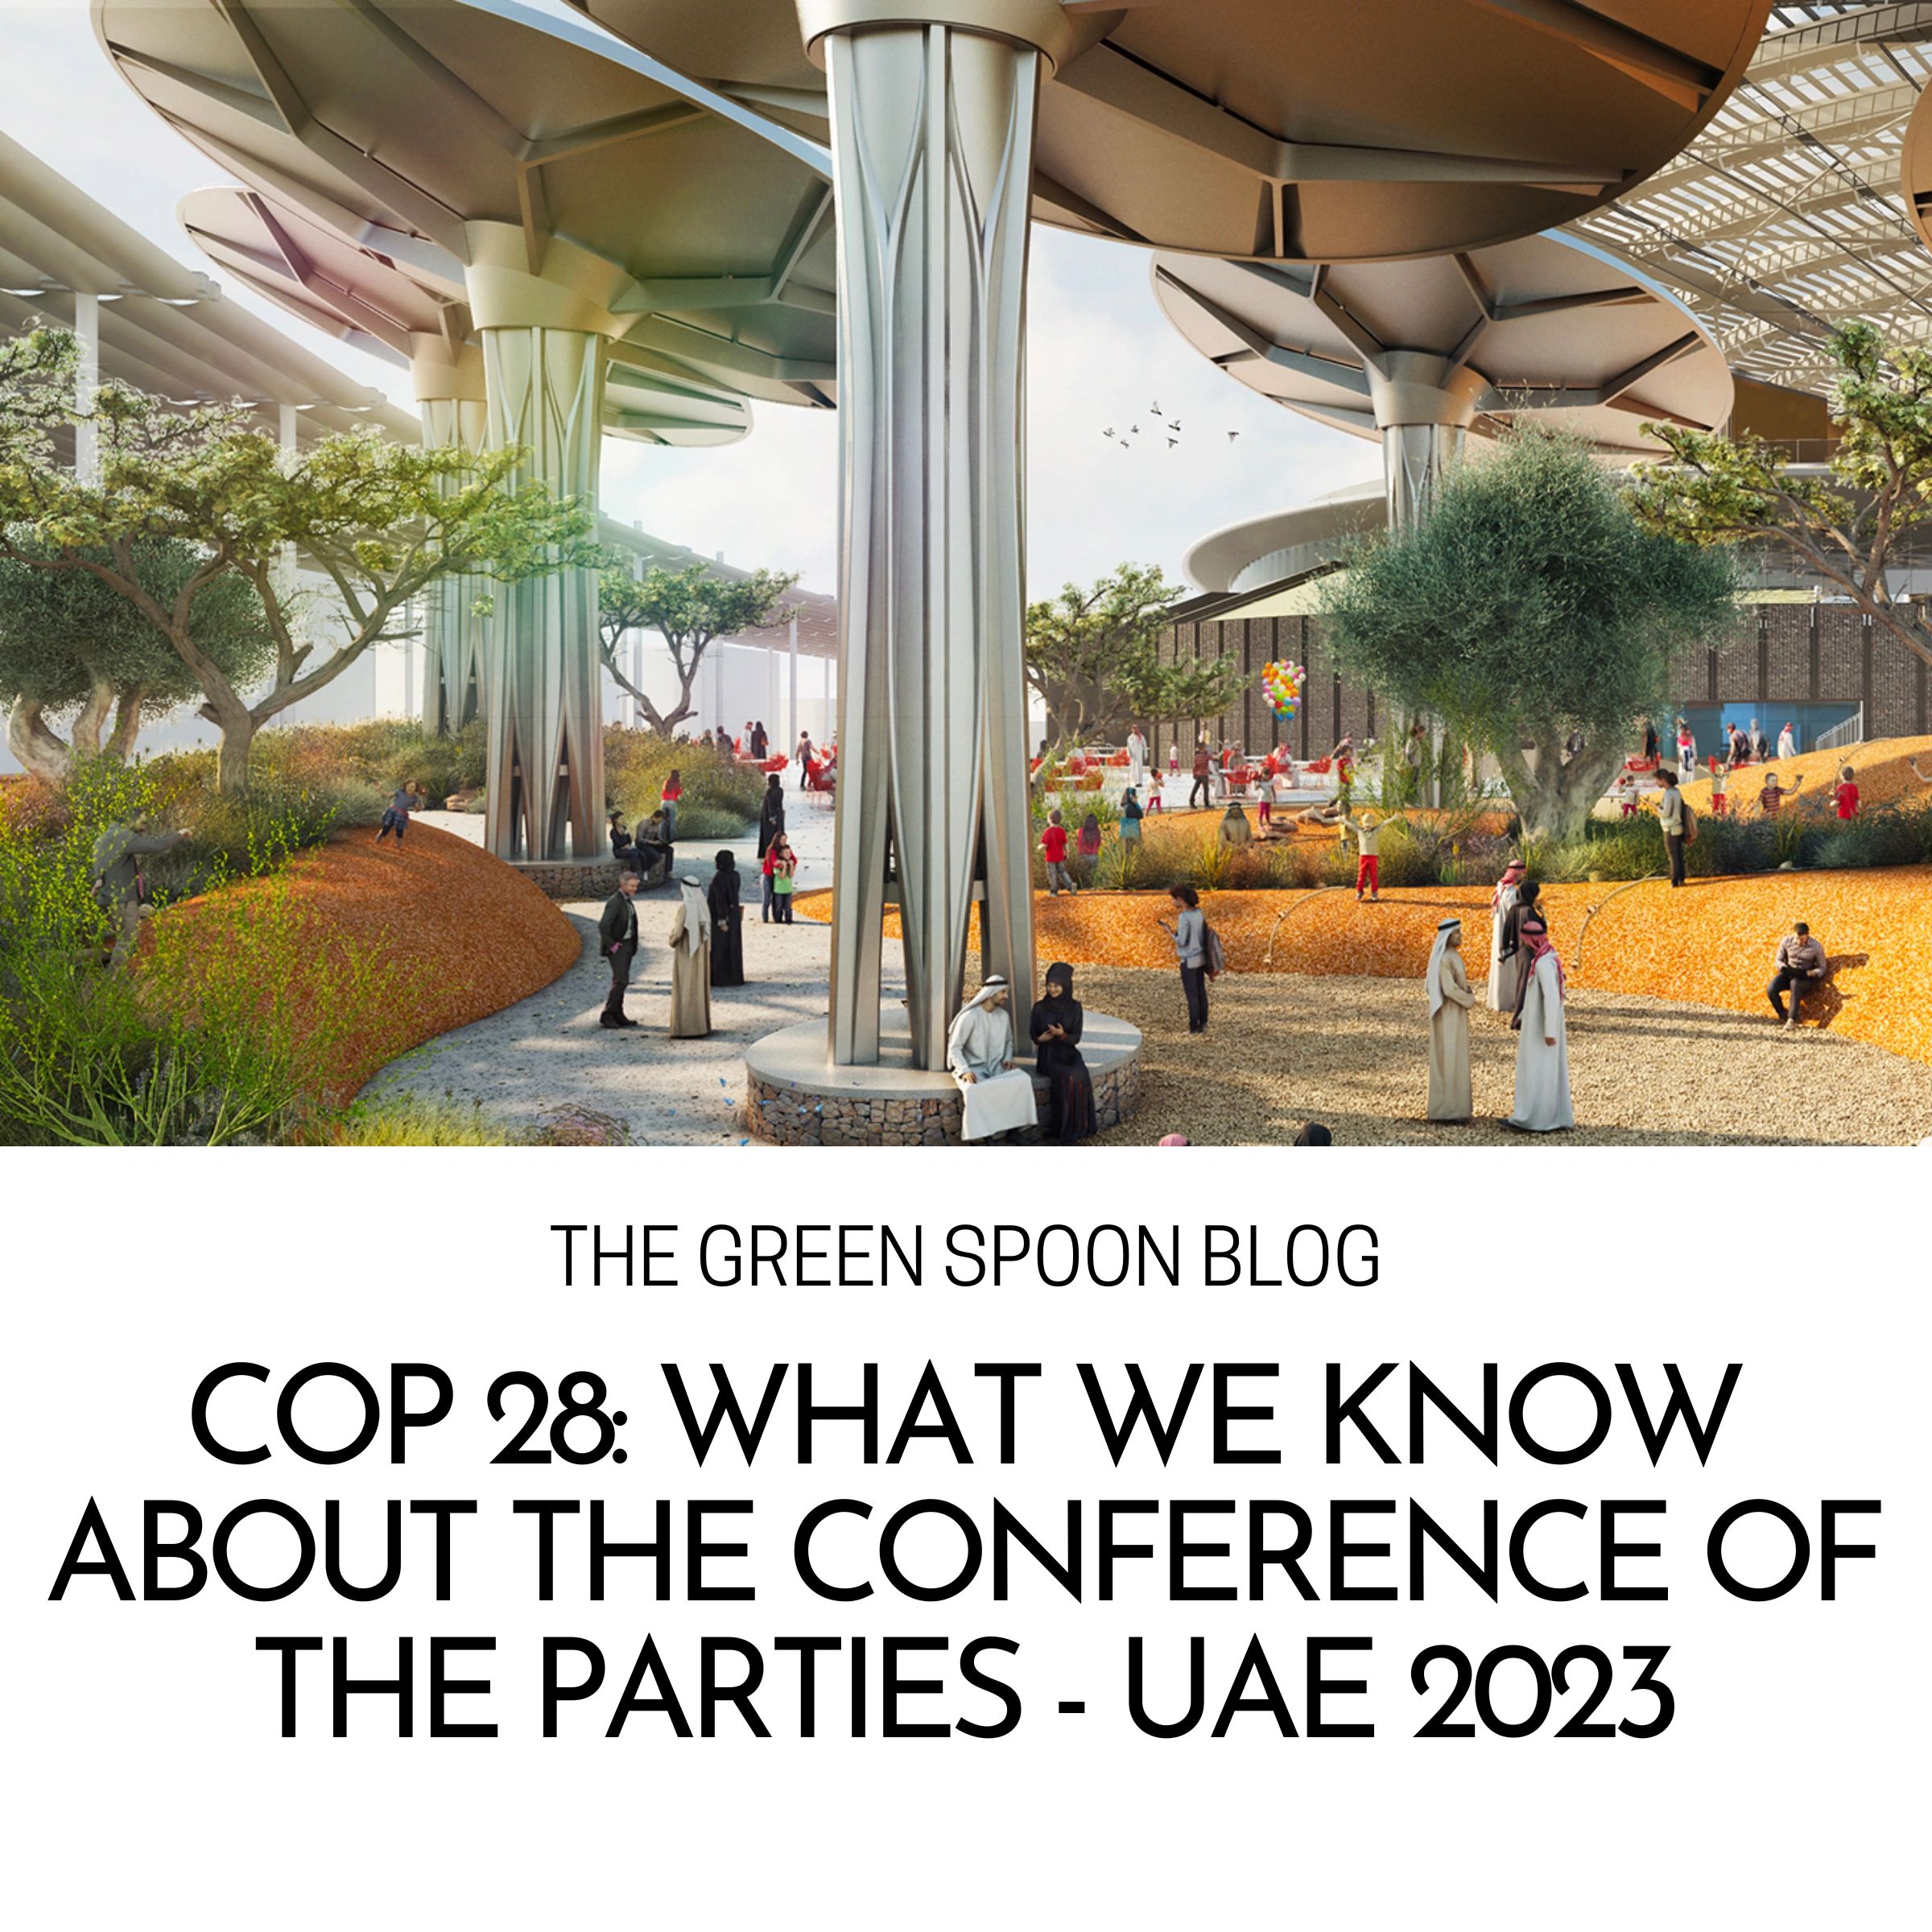 Cop 28 What we know about the Conference of the Parties UAE 2023